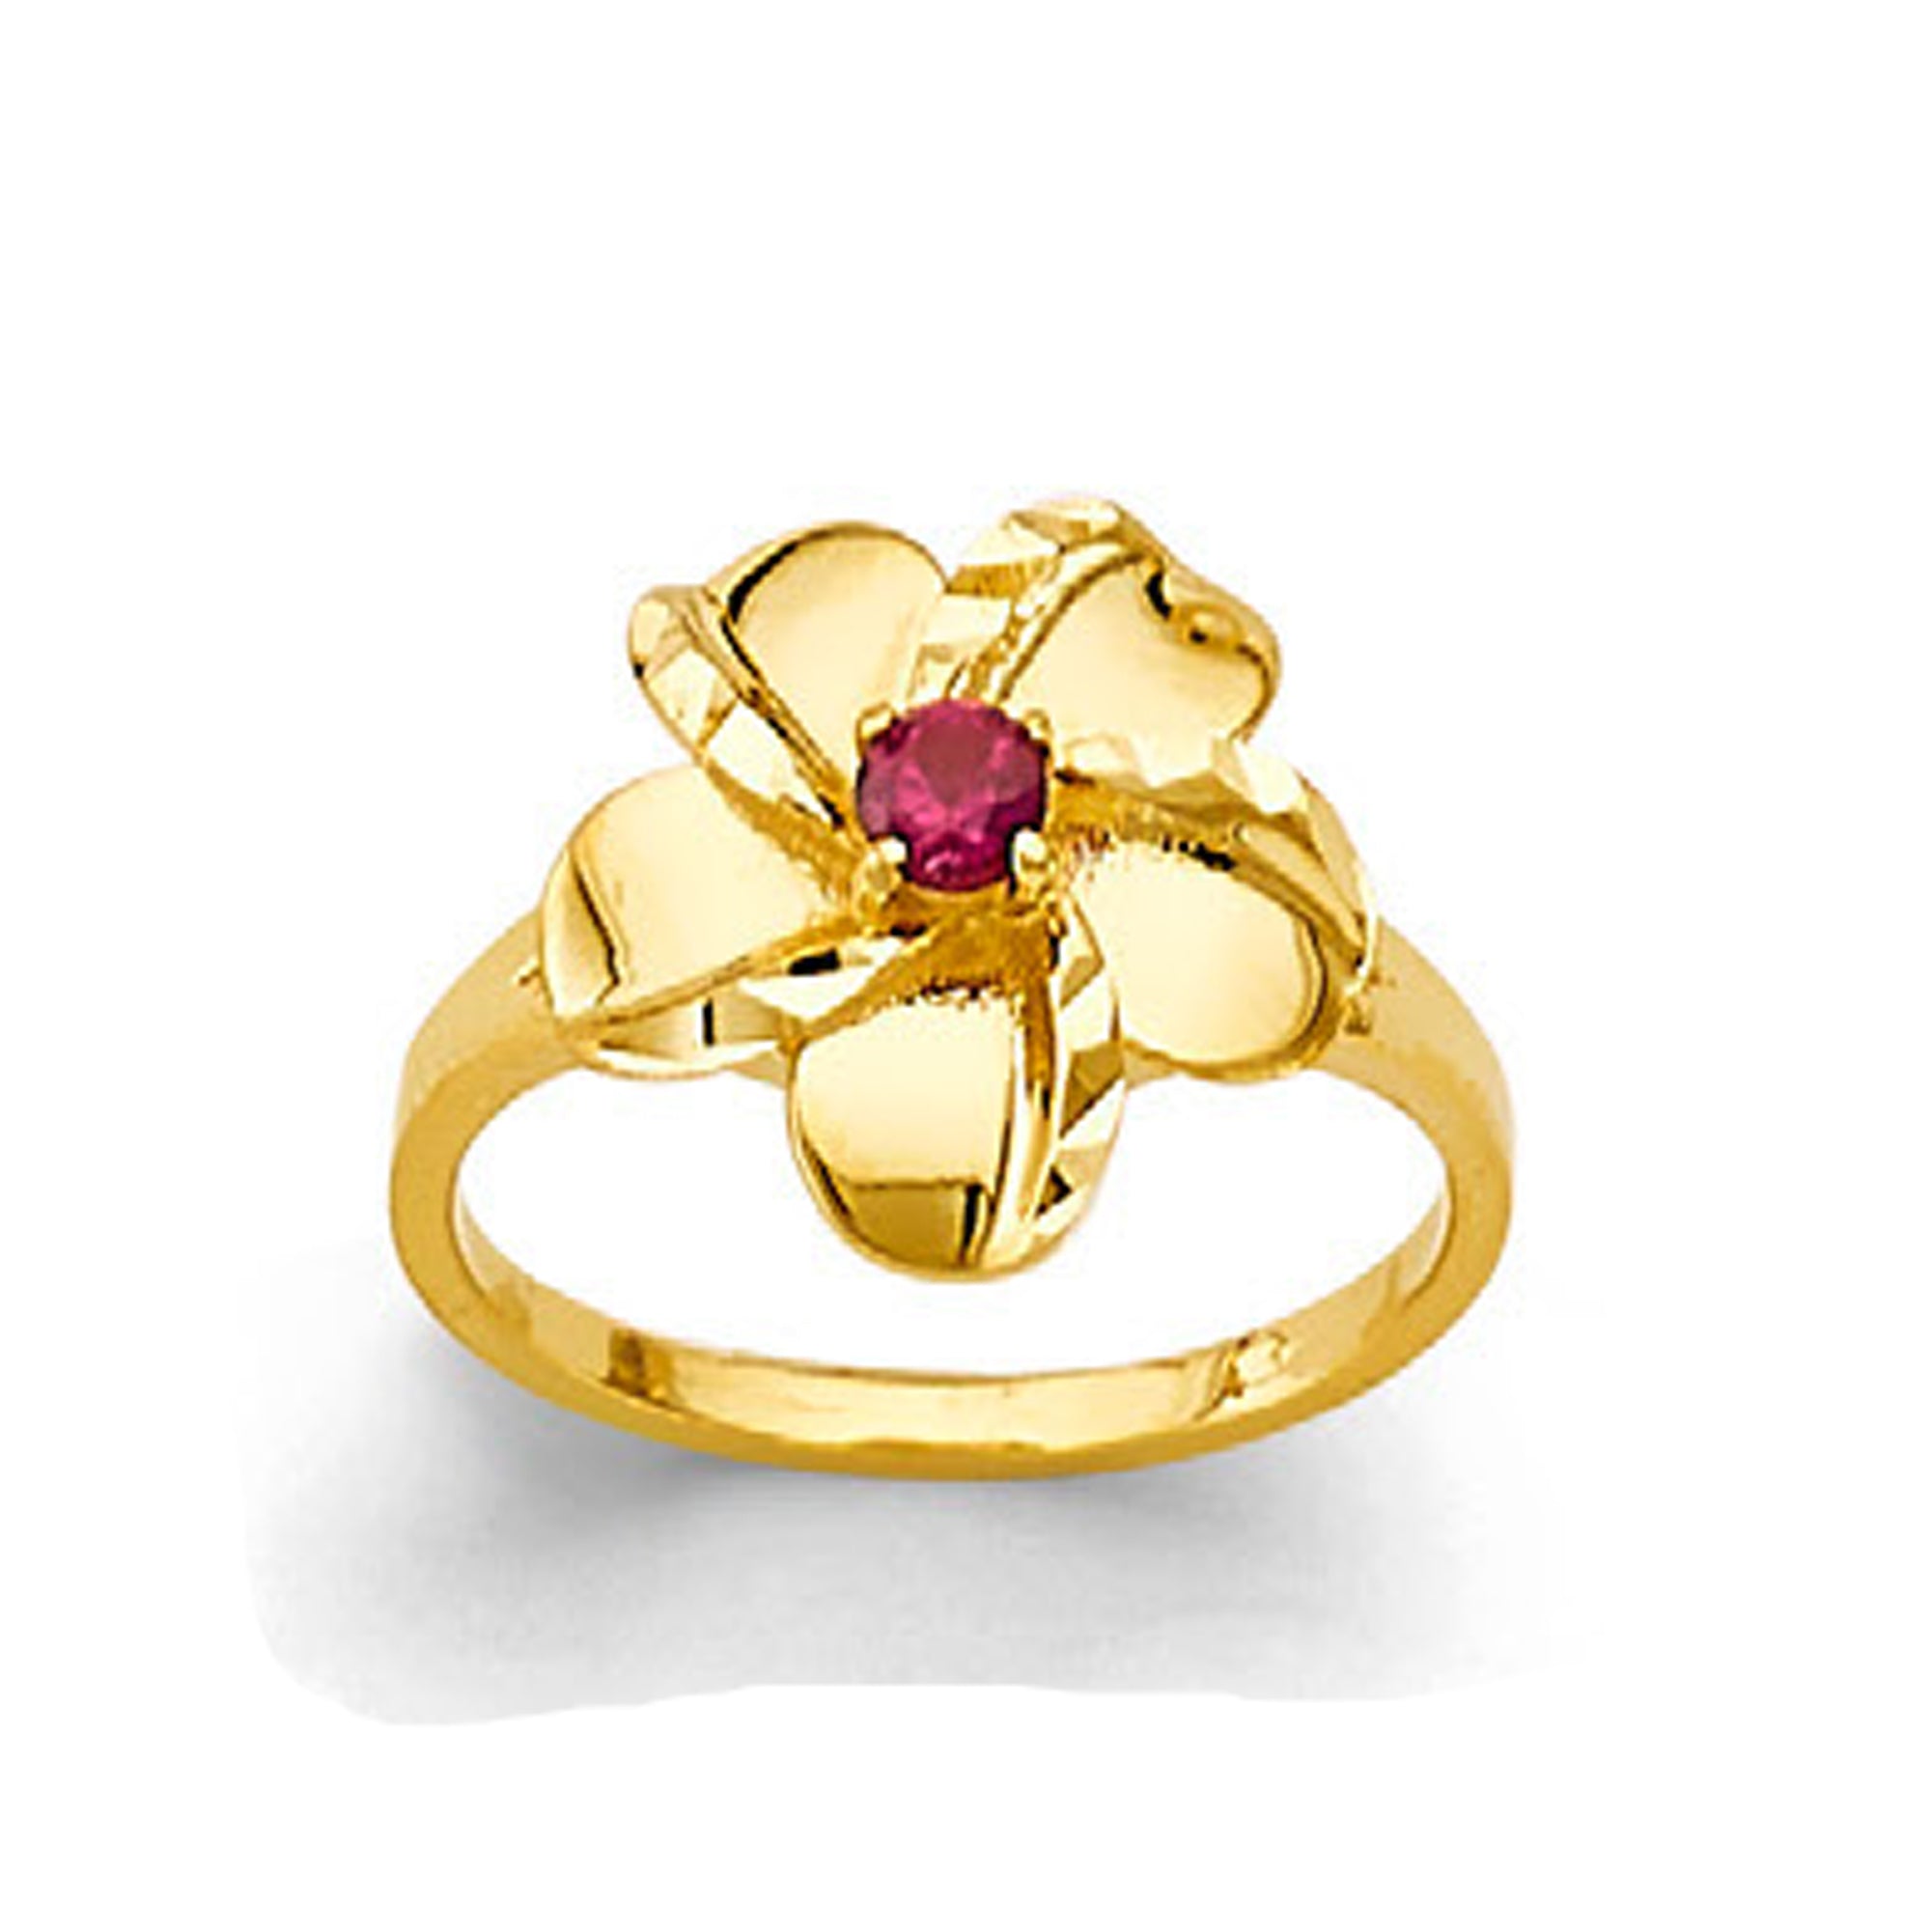 Ruby-studded Five Petals Flower Ring in Solid Gold 